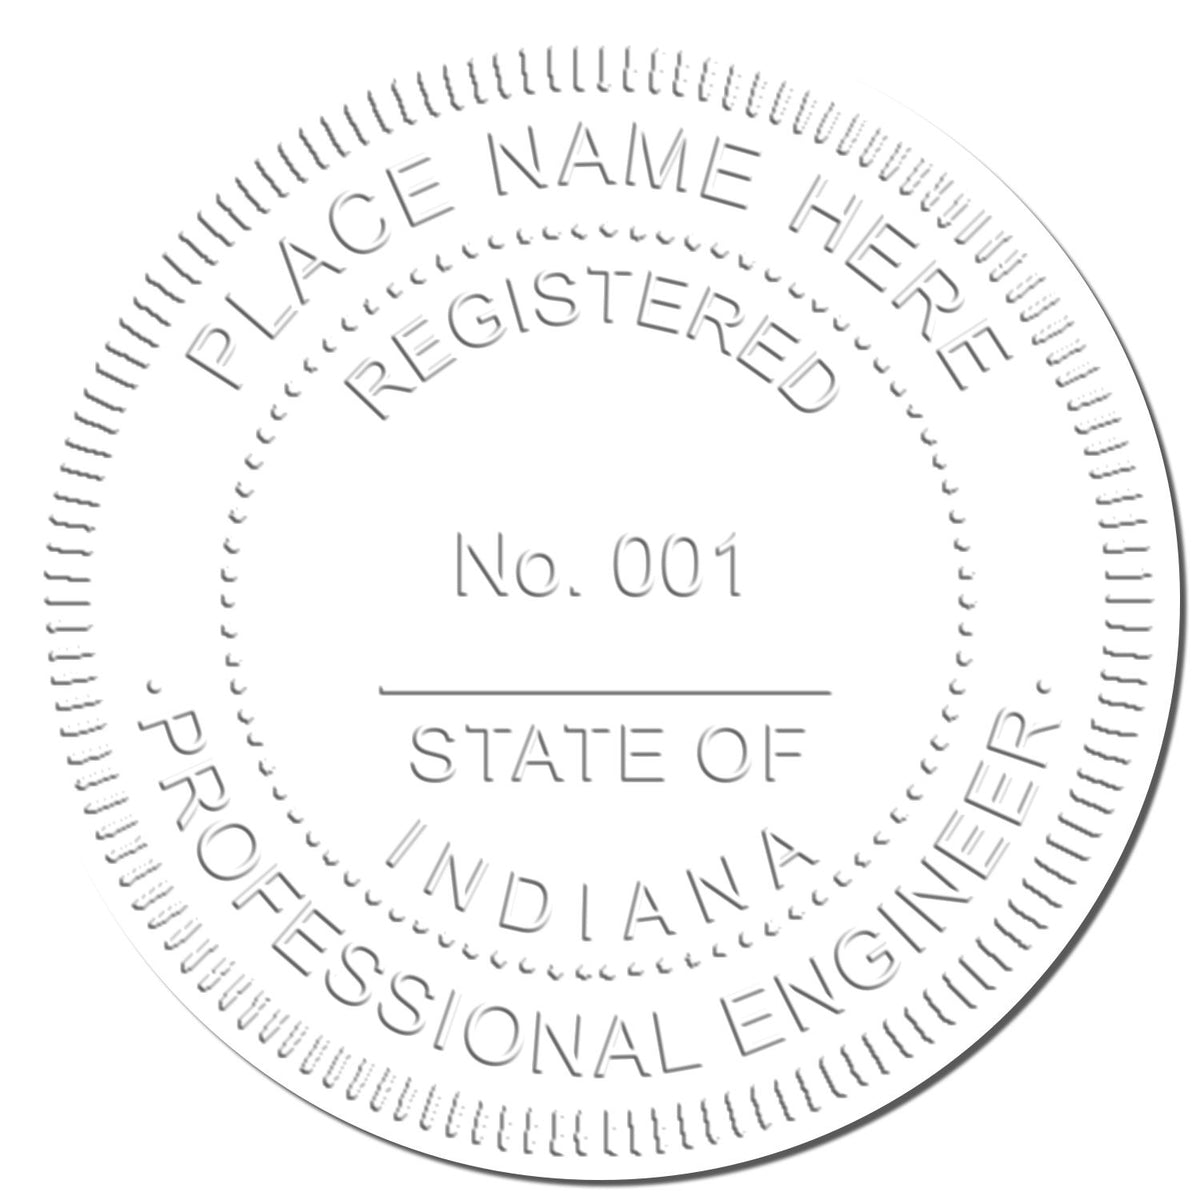 The Long Reach Indiana PE Seal stamp impression comes to life with a crisp, detailed photo on paper - showcasing true professional quality.